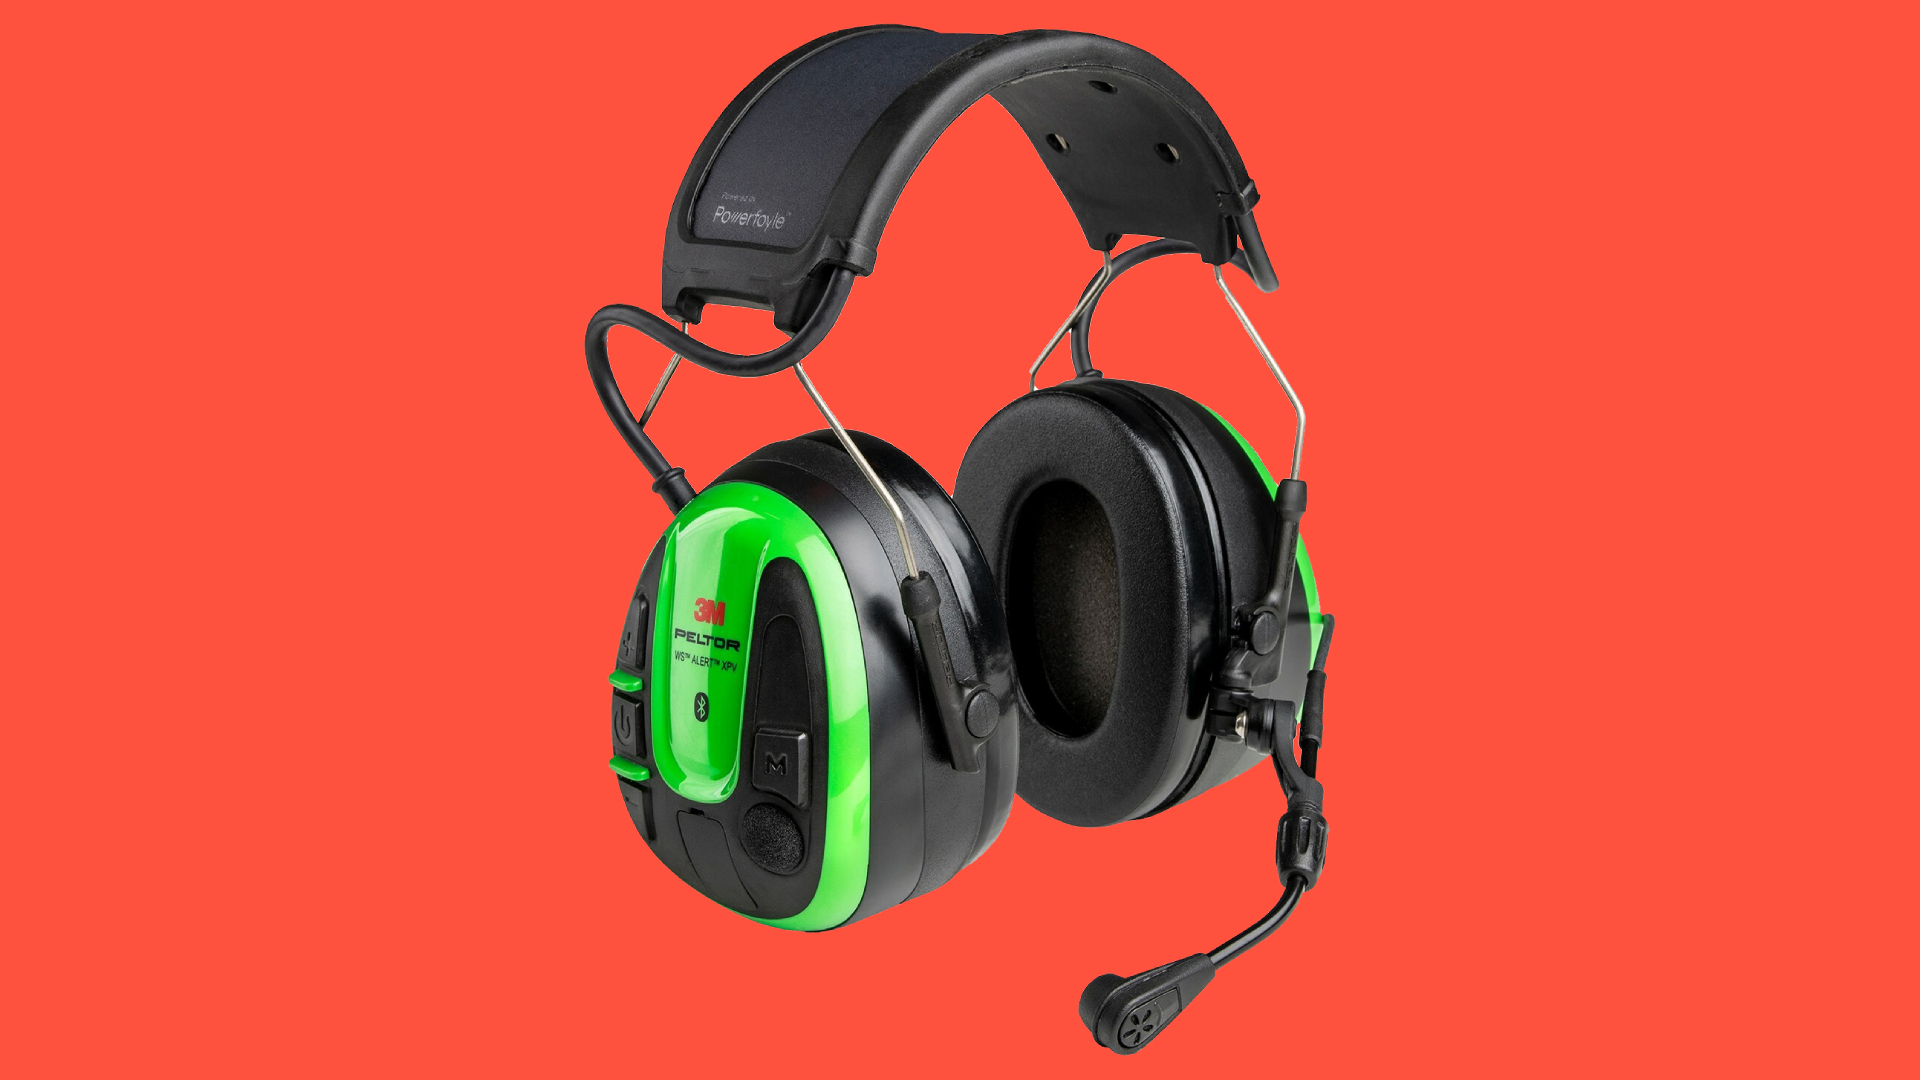  3M has announced a solar charging headset, so when do we get gaming peripherals with near infinite battery life? 